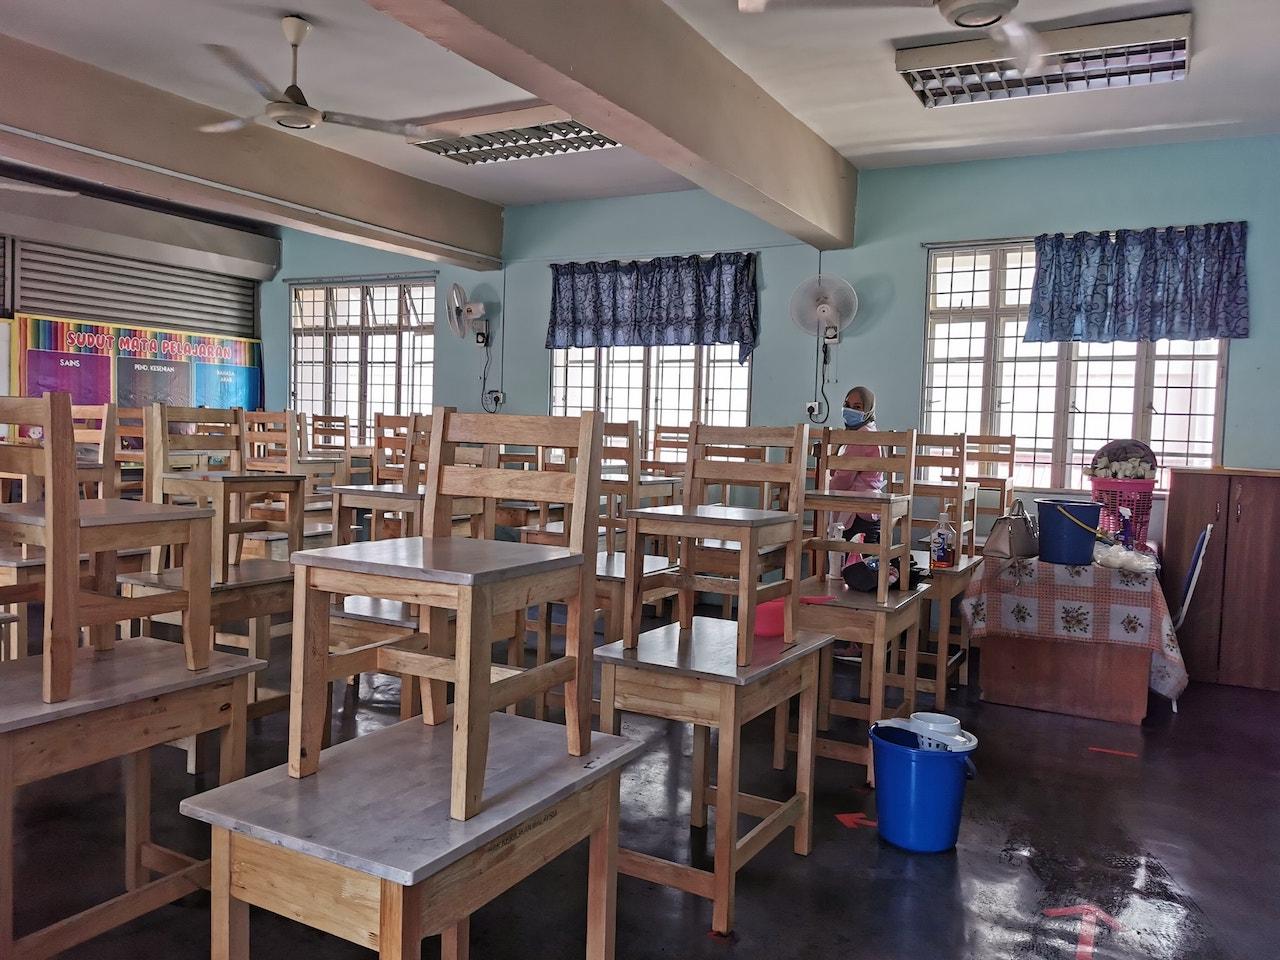 Classrooms at Sekolah Kebangsaan Bukit Jelutong in Shah Alam are cleaned earlier this year before the return of students in March. Photo: Facebook